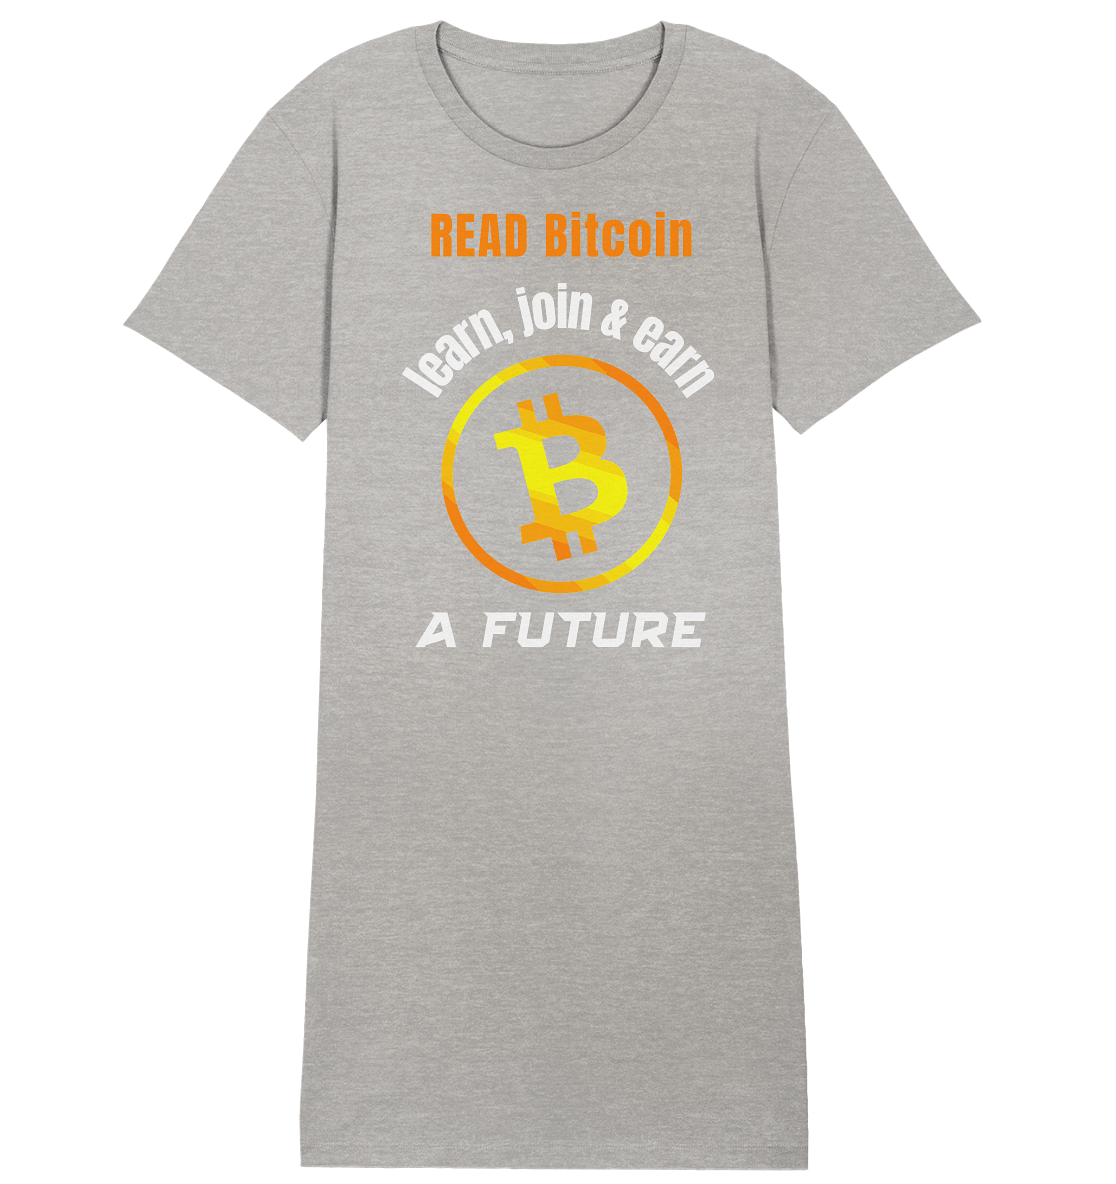 READ BITCOIN learn, join & earn A FUTURE - Var. Ladies collection  - Ladies Organic Shirt Dress